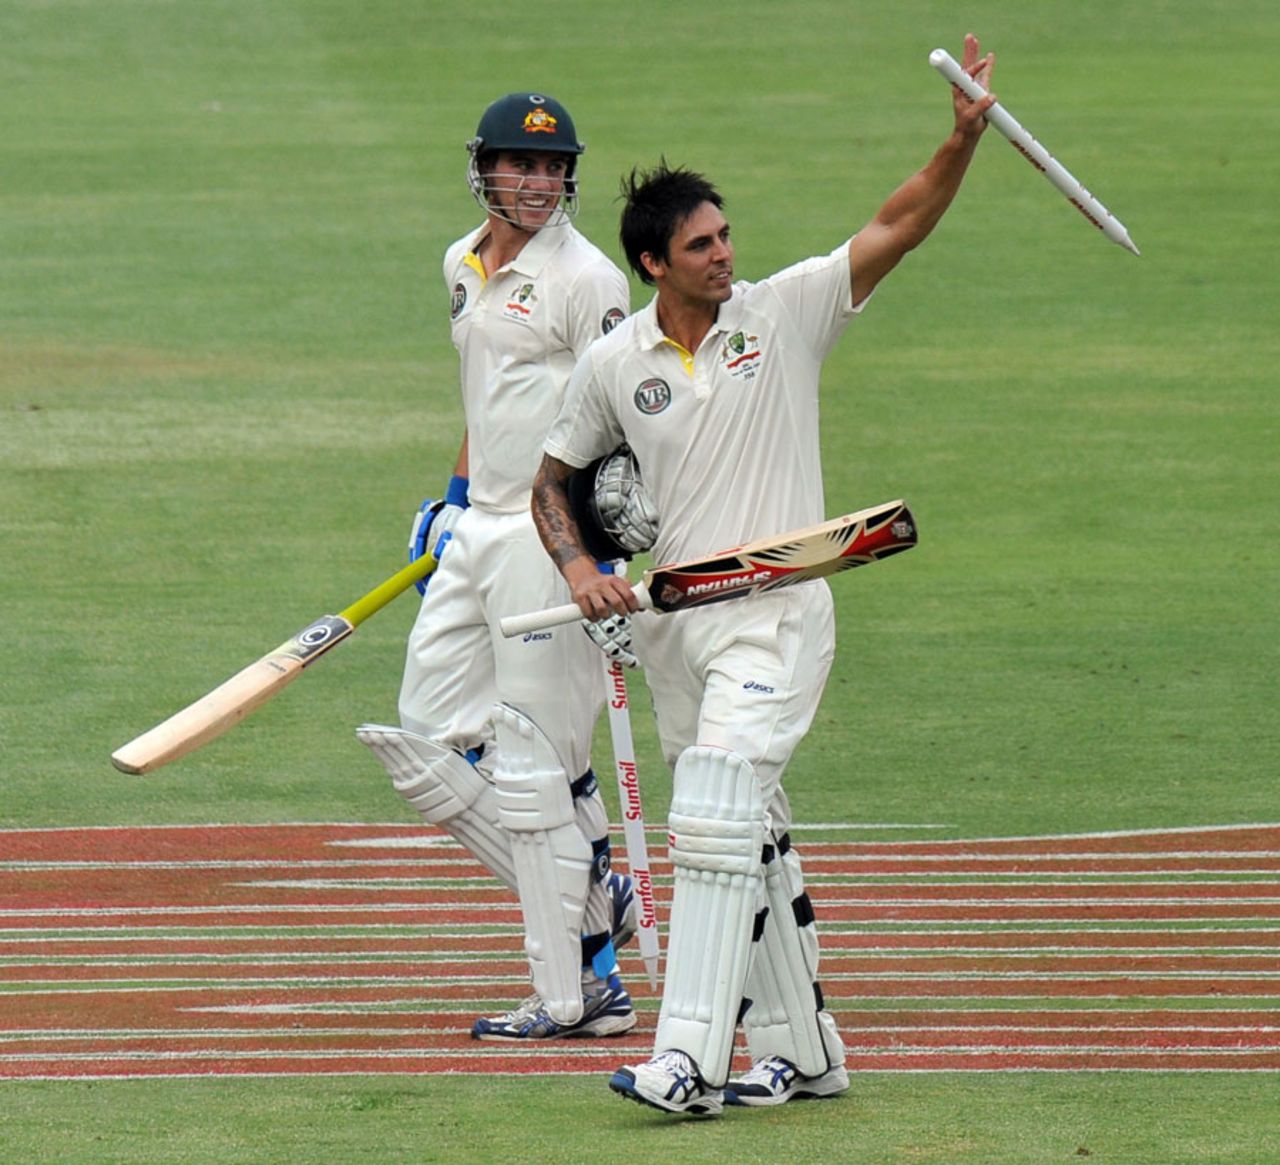 Pat Cummins and Mitchell Johnson walk off after Australia's successful chase, South Africa v Australia, 2nd Test, Johannesburg, 5th day, November 21, 2011